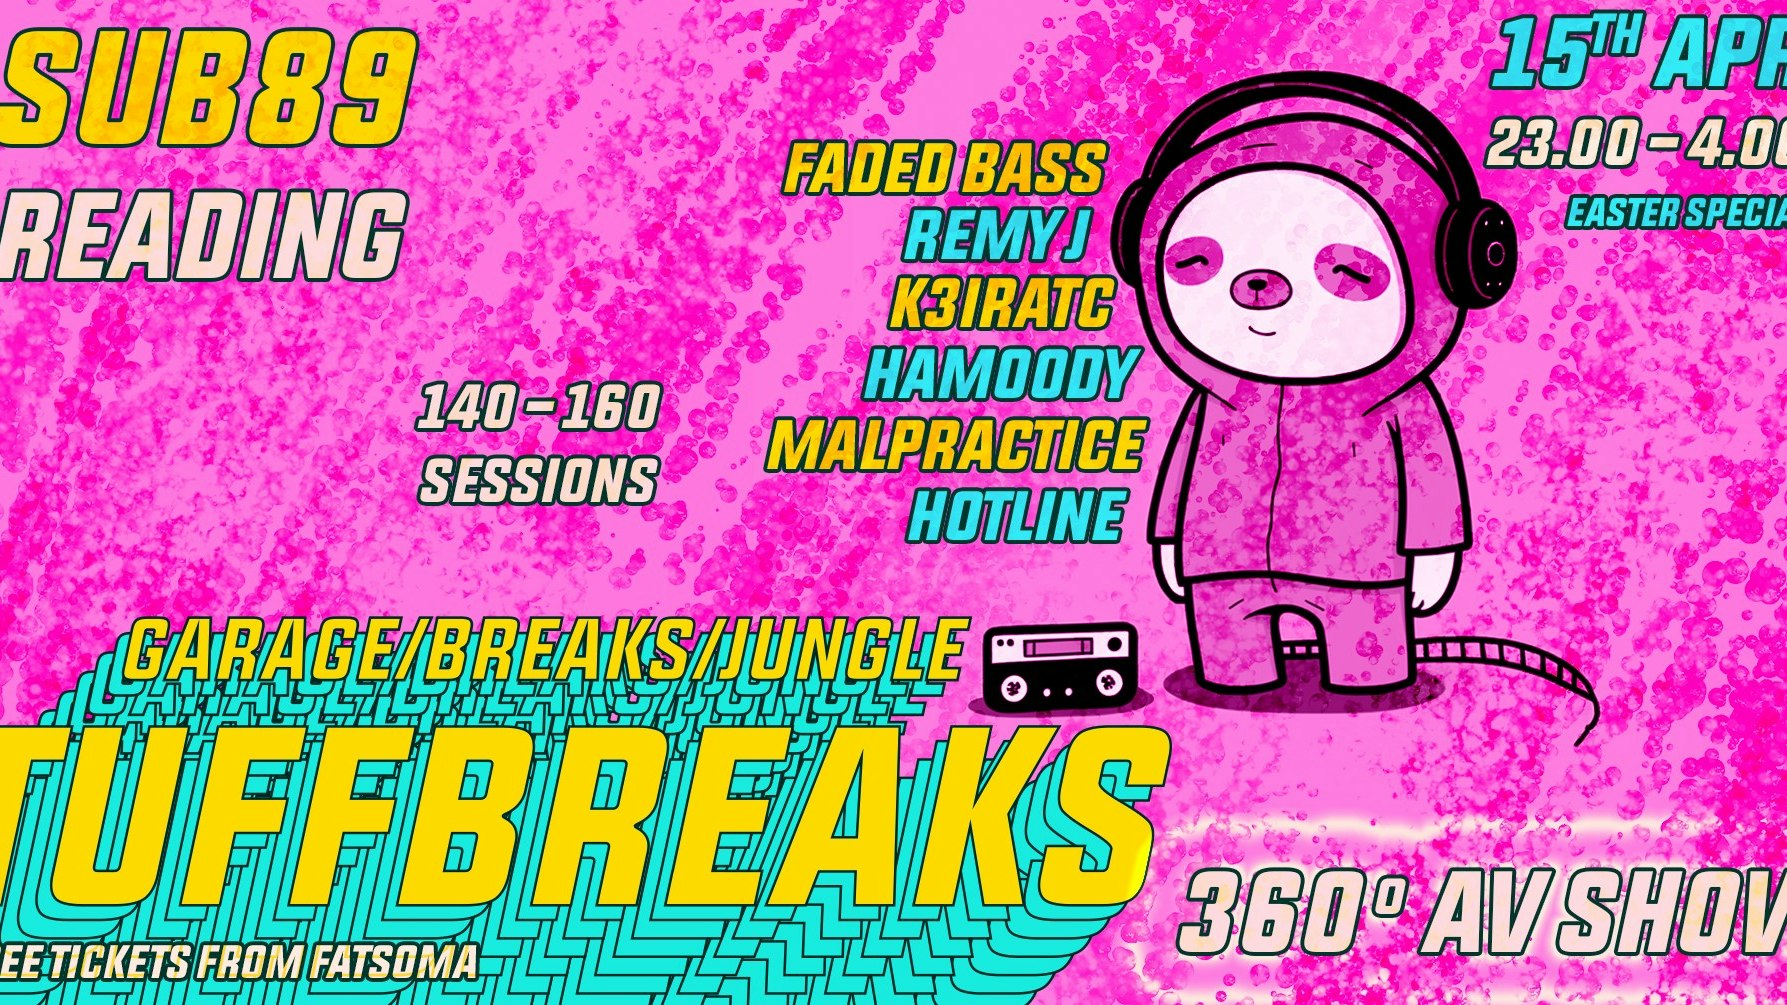 CANCELLED -TUFFBREAKS 360° Audio-Visual Showcase: UKG, Breaks and more